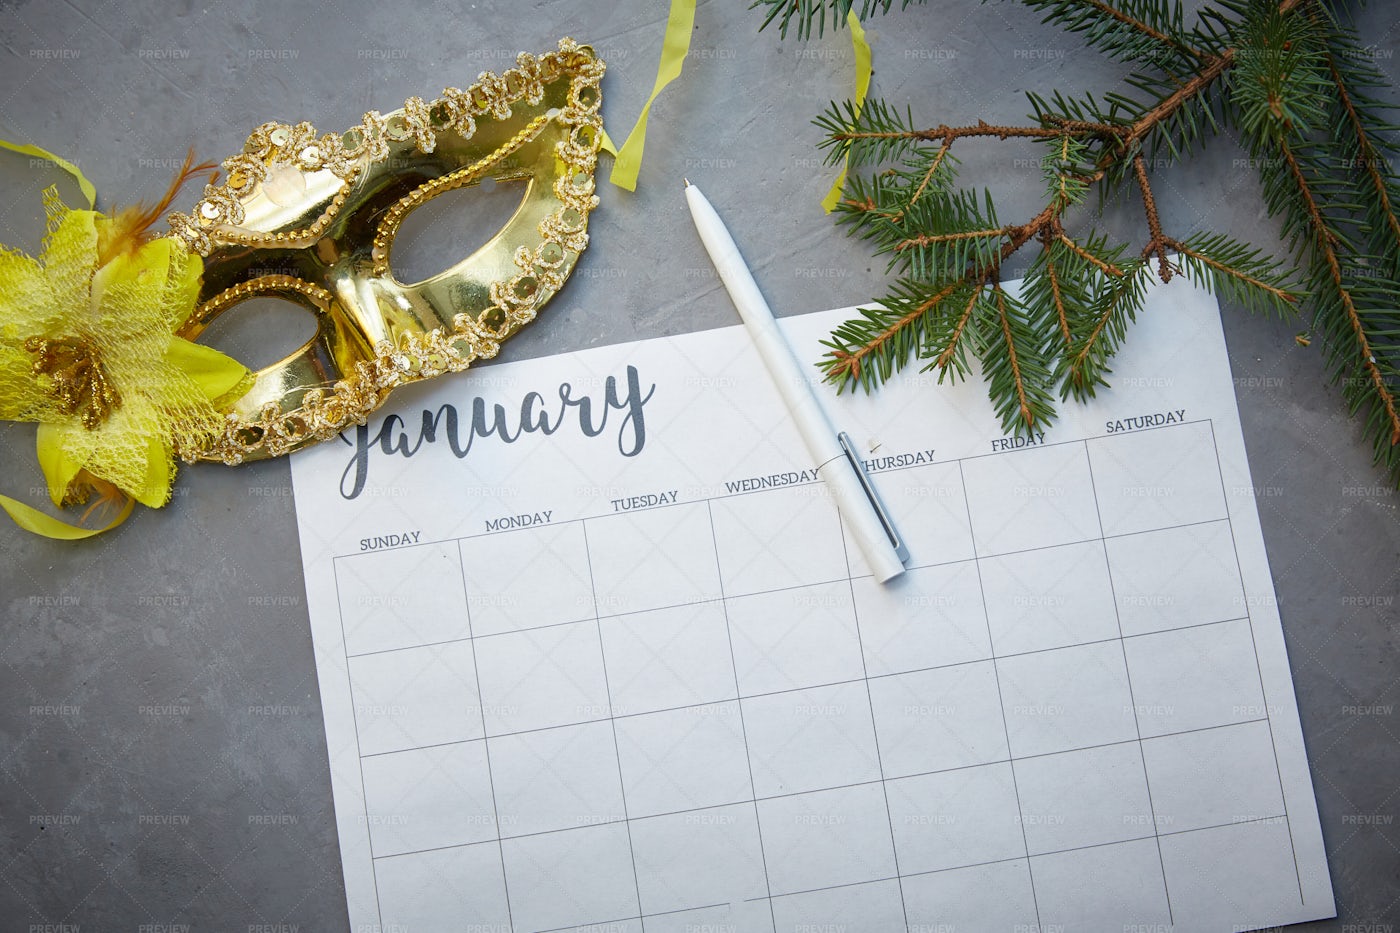 Mask Next To Planner.: Stock Photos